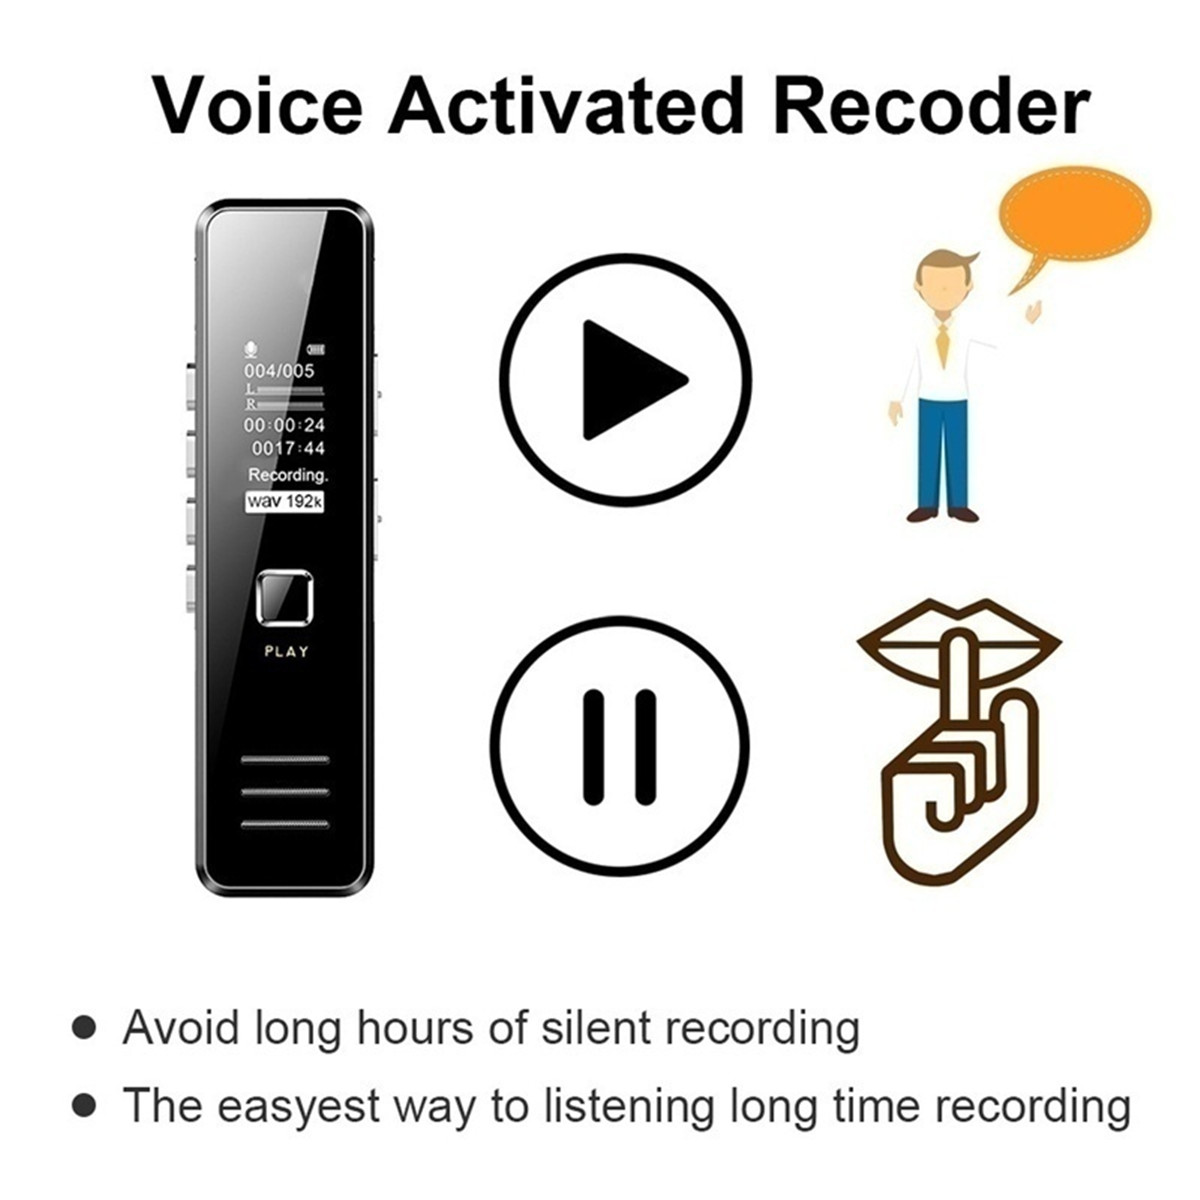 Digital-Voice-Recorder-20-Hour-Recording-MP3-Player-Mini-Voice-Recording-Pen-for-Lectures-Meetings-I-1597503